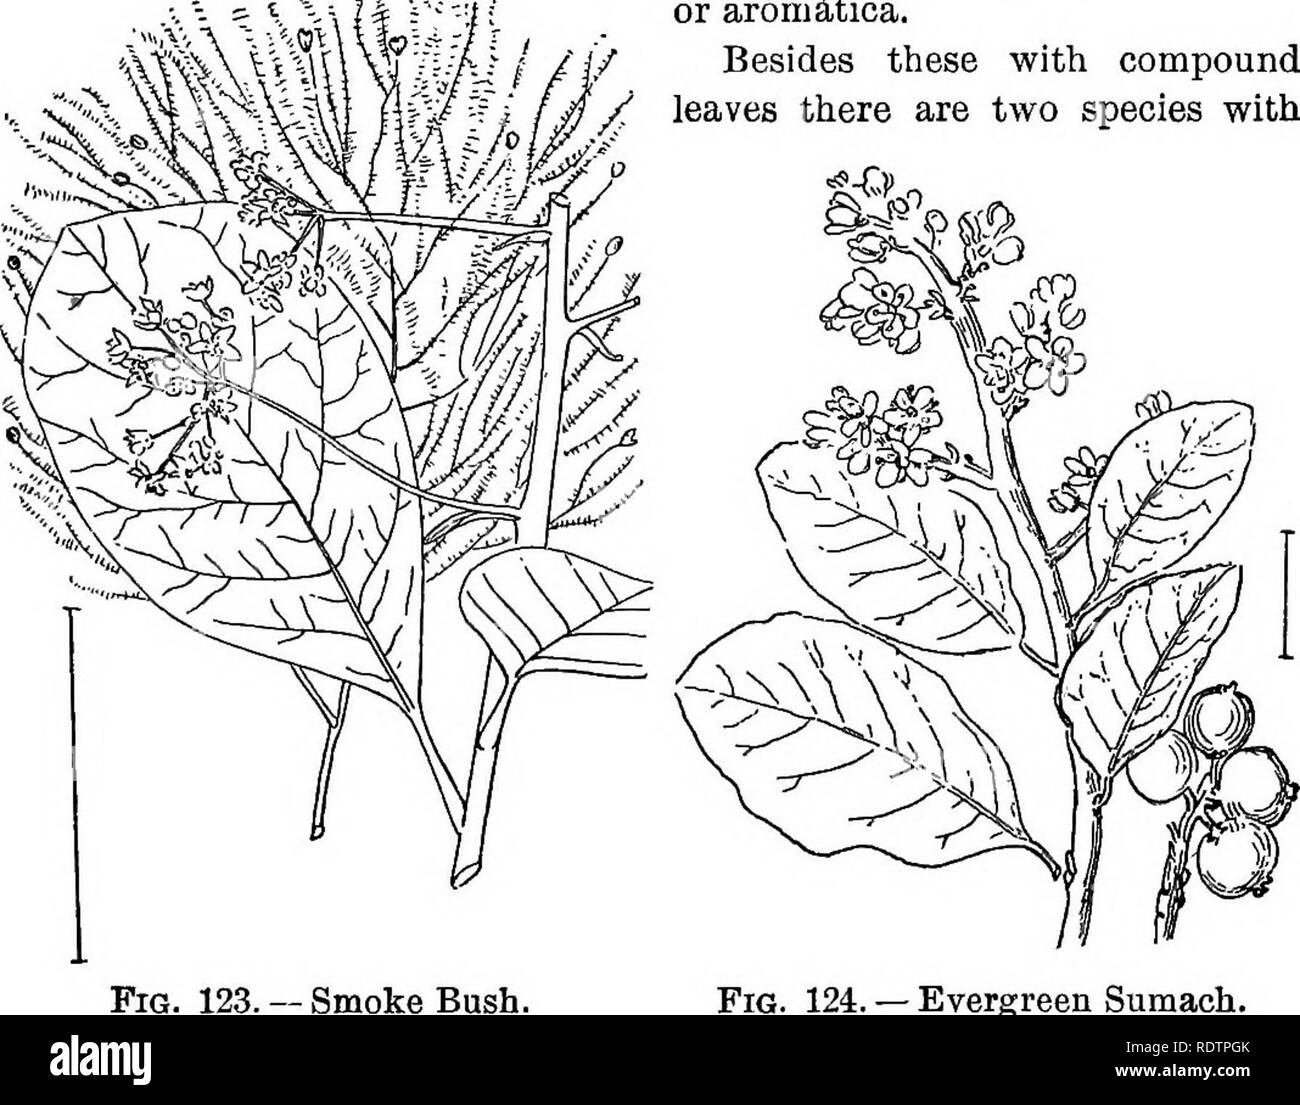 . Ornamental shrubs of the United States (hardy, cultivated). Shrubs. KEY TO THE SUMACHS 109 blades is Mountain Sumach (115) — Rhus copallina ; with iinely toothed blades, Japan Sdmach—Ehus semial^ta and var. Osb^ckii; with coarsely toothed blades, European or Elm-leaved Sumach (116) — Rhus Cori^ria. The smallest species with only 3 aromatic blades is the Fragrant Sumach (117)—Rhus canadensis or aromditica. Besides these with compound leaves there are two species with. - Smoke Bush Fig. 124. — Evergreen Sumach. simple rounded leaves, sometimes placed in a separate genus, Cdtinus. These are cal Stock Photo